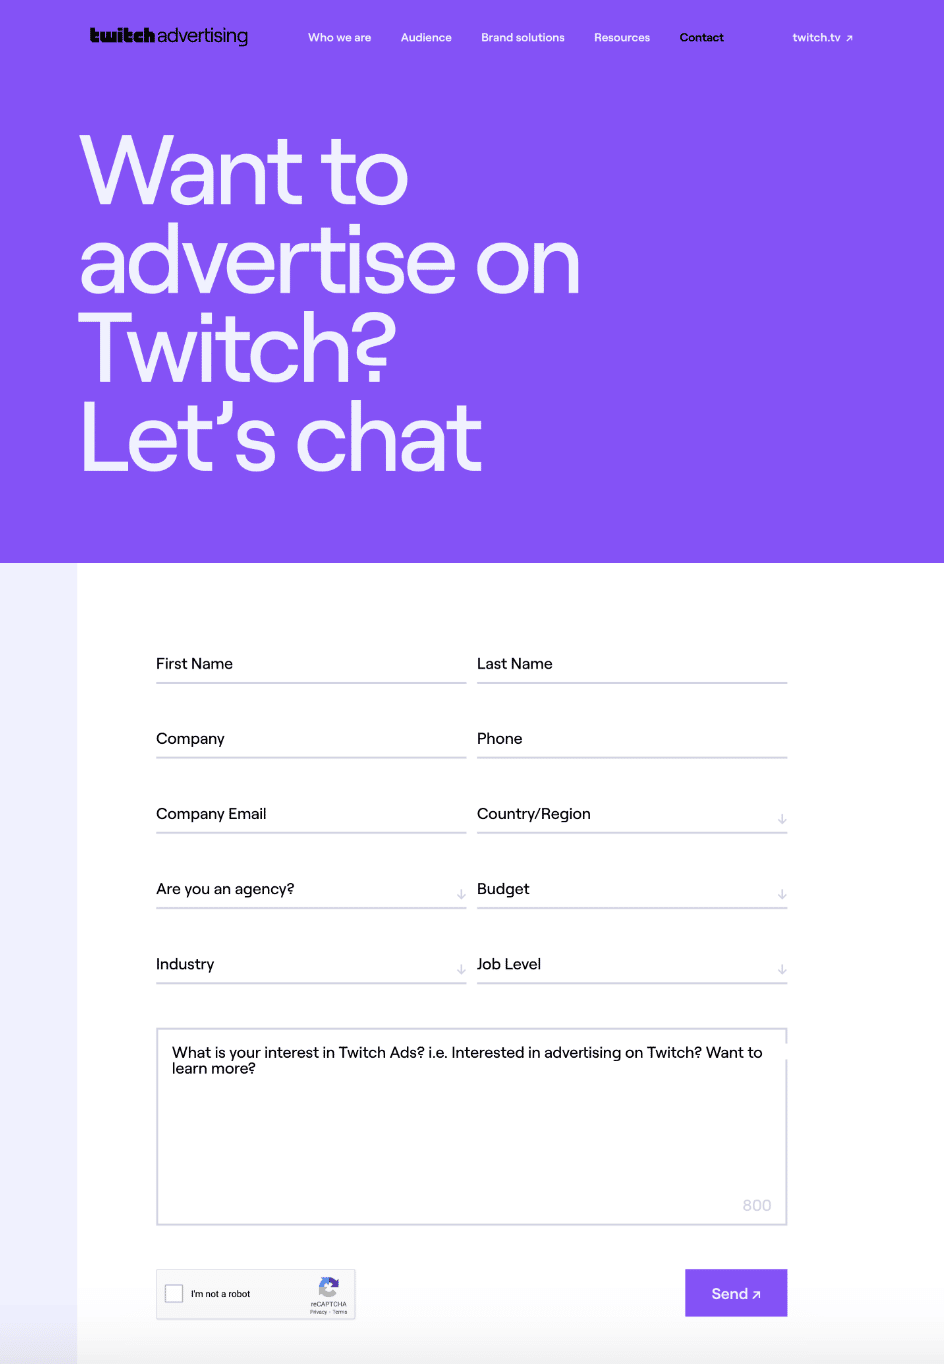 How to advertise on Twitch - contact form